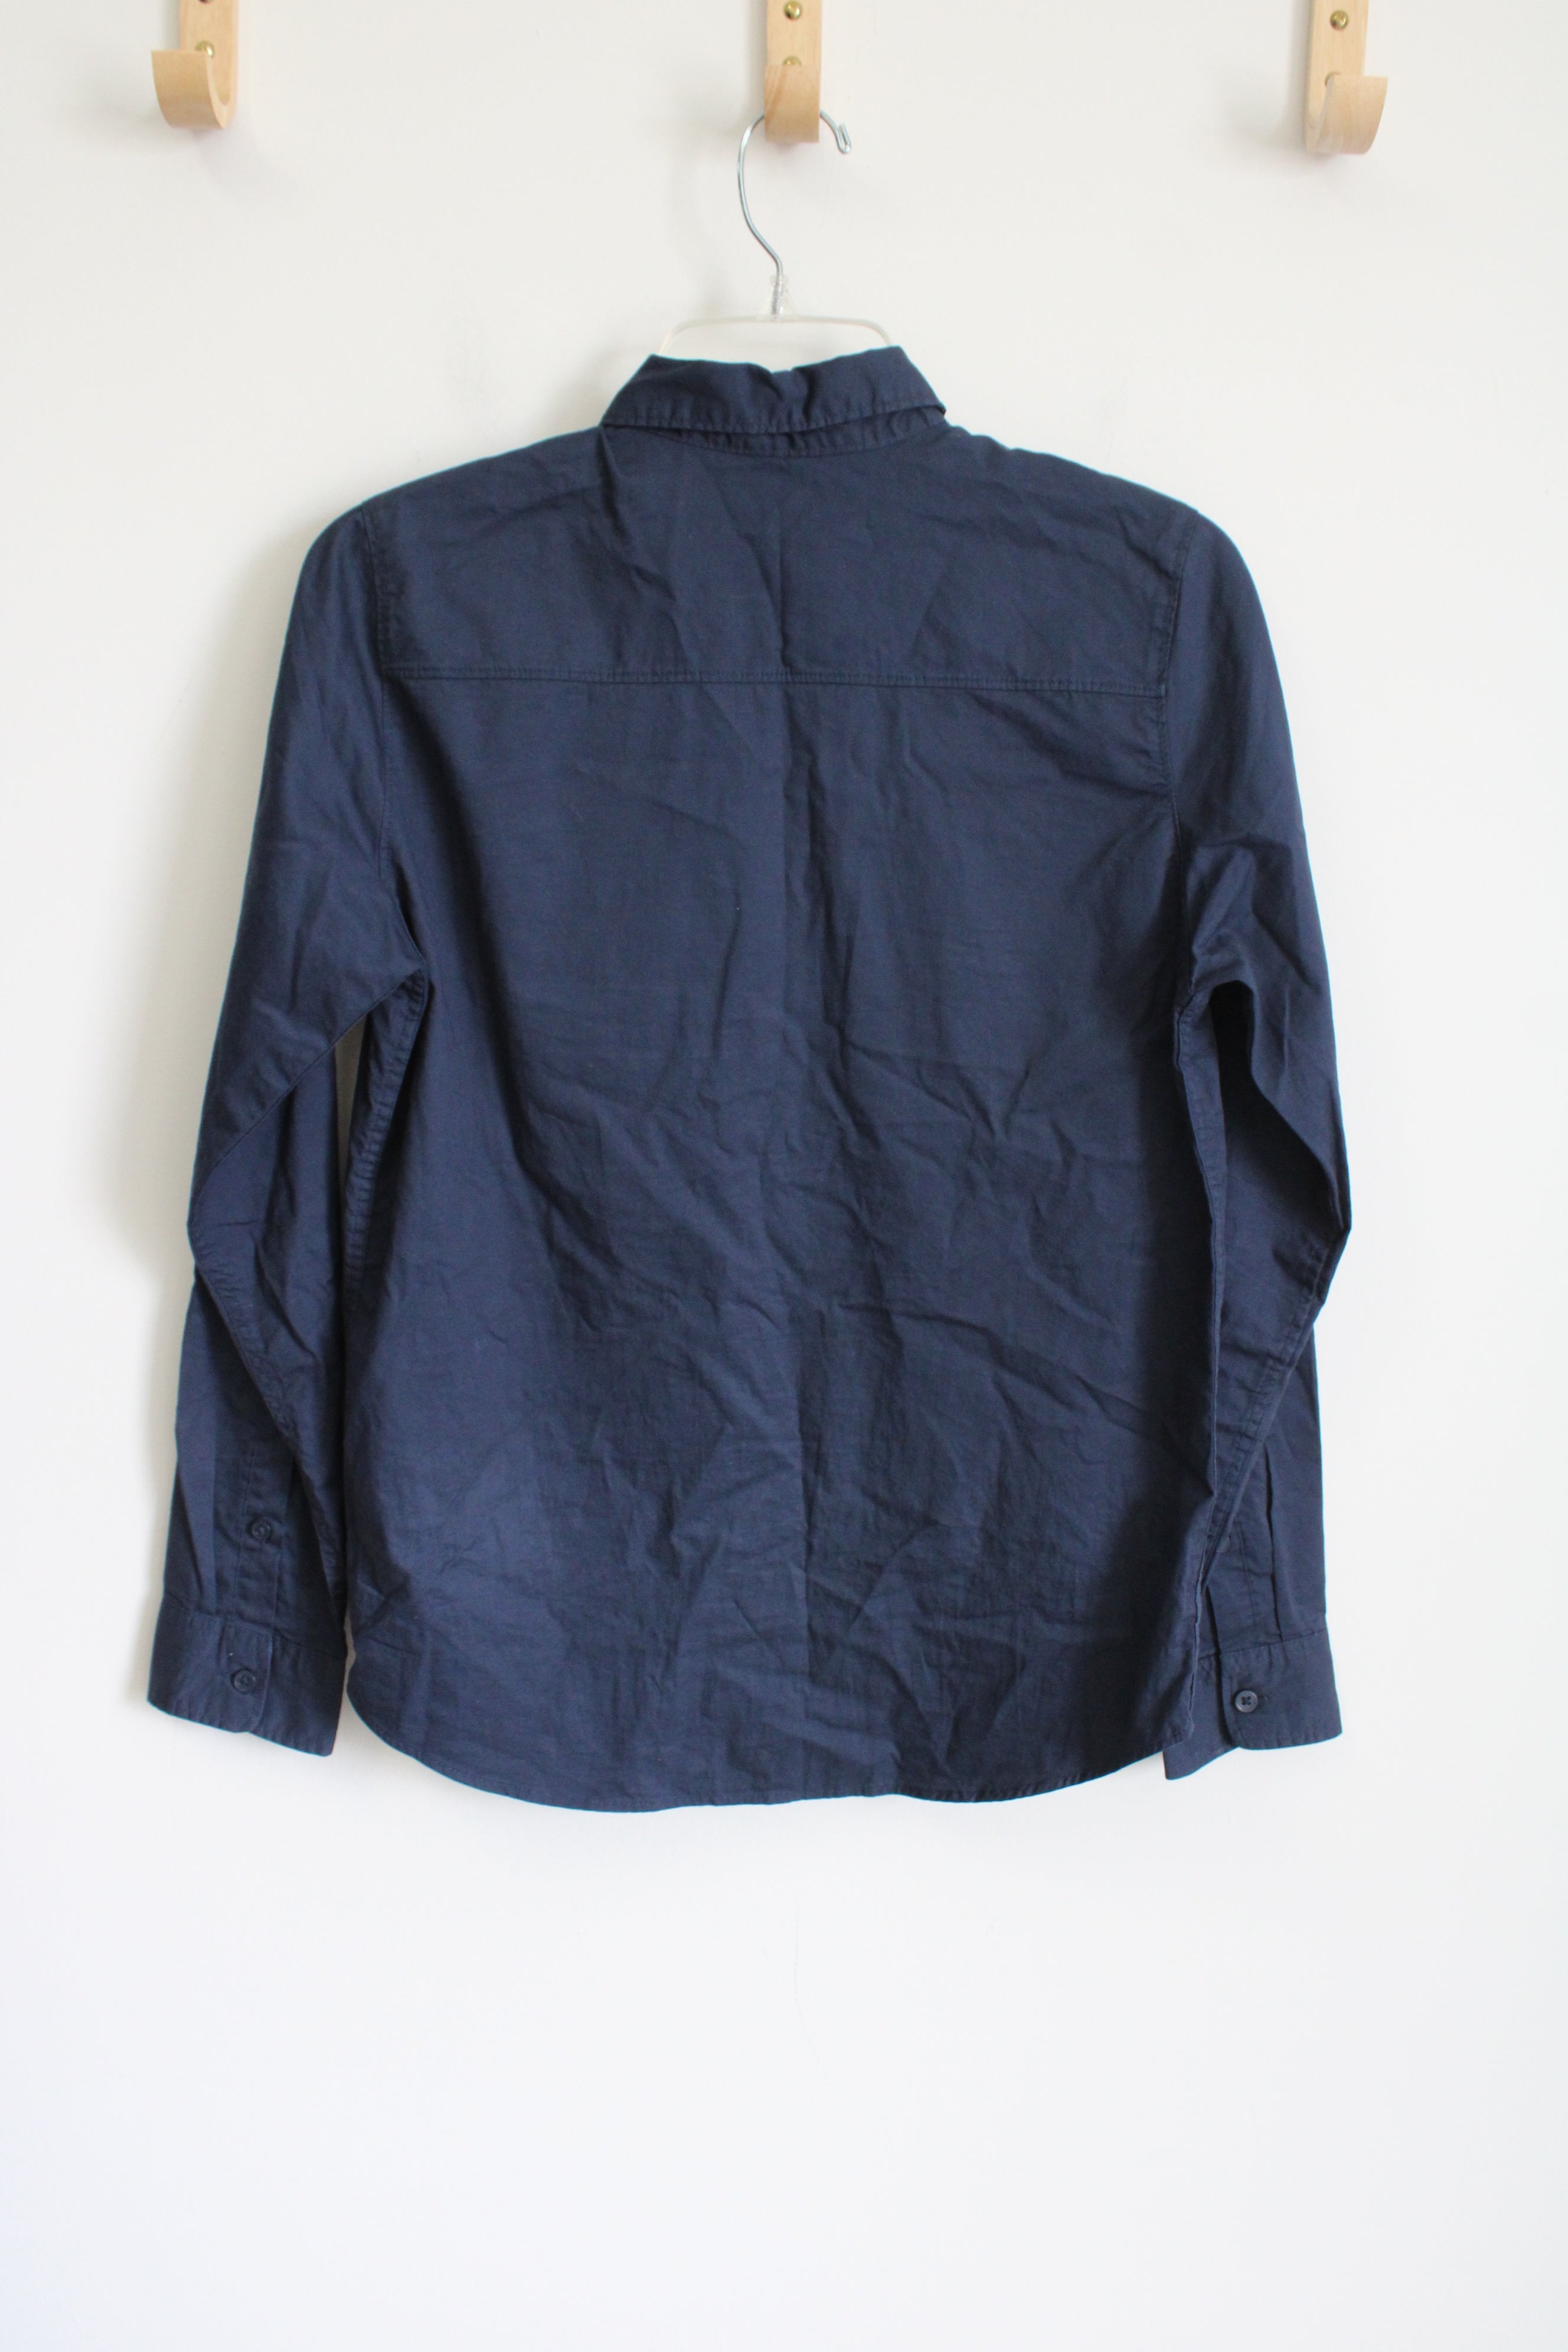 H&M Navy Long Sleeved Button Down | Youth 16